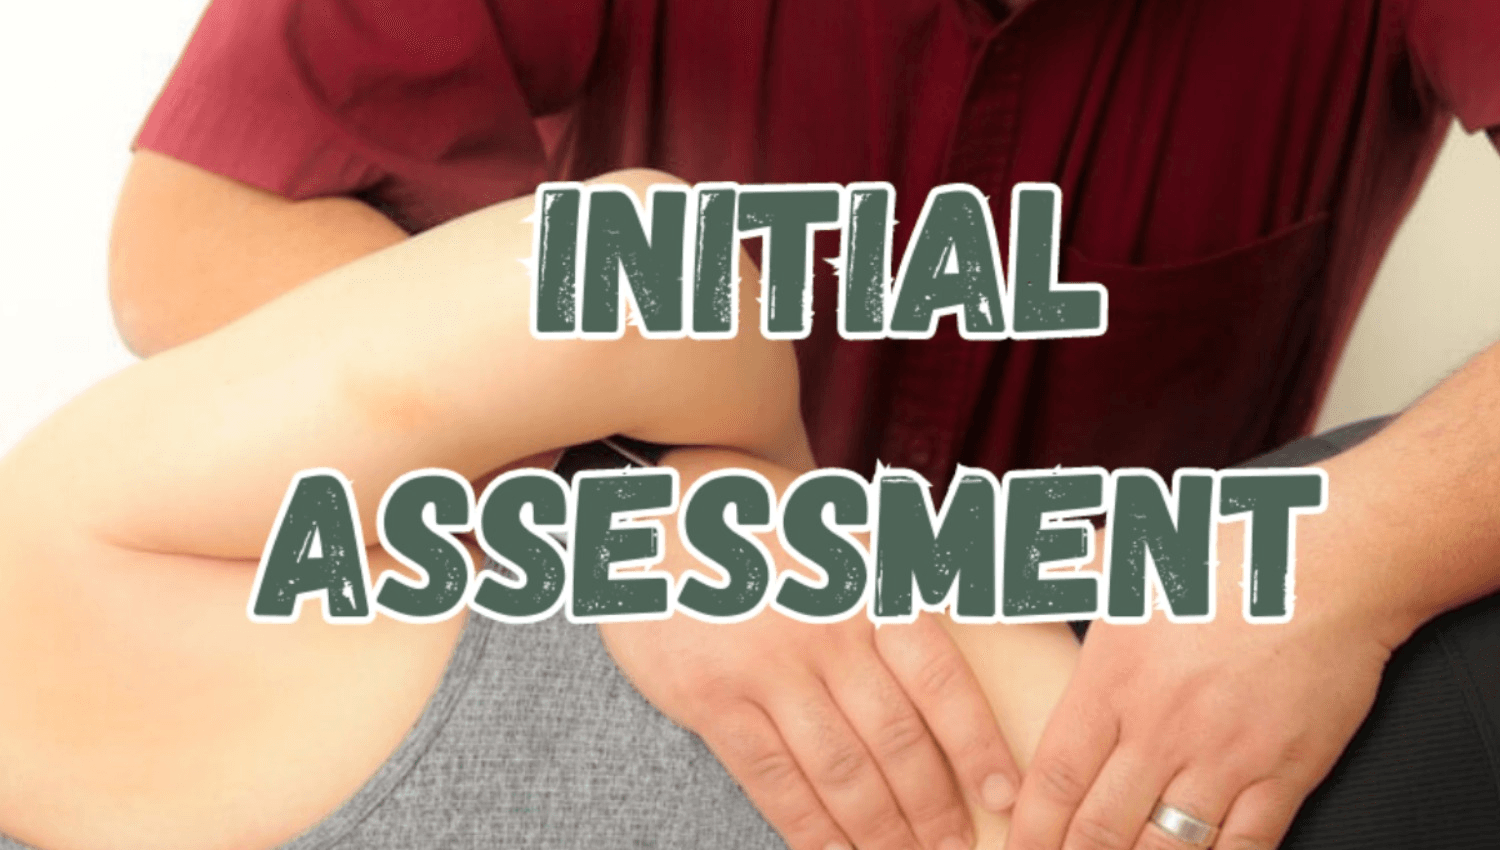 Image for initial osteoapthic assessment and Treatment FB Special